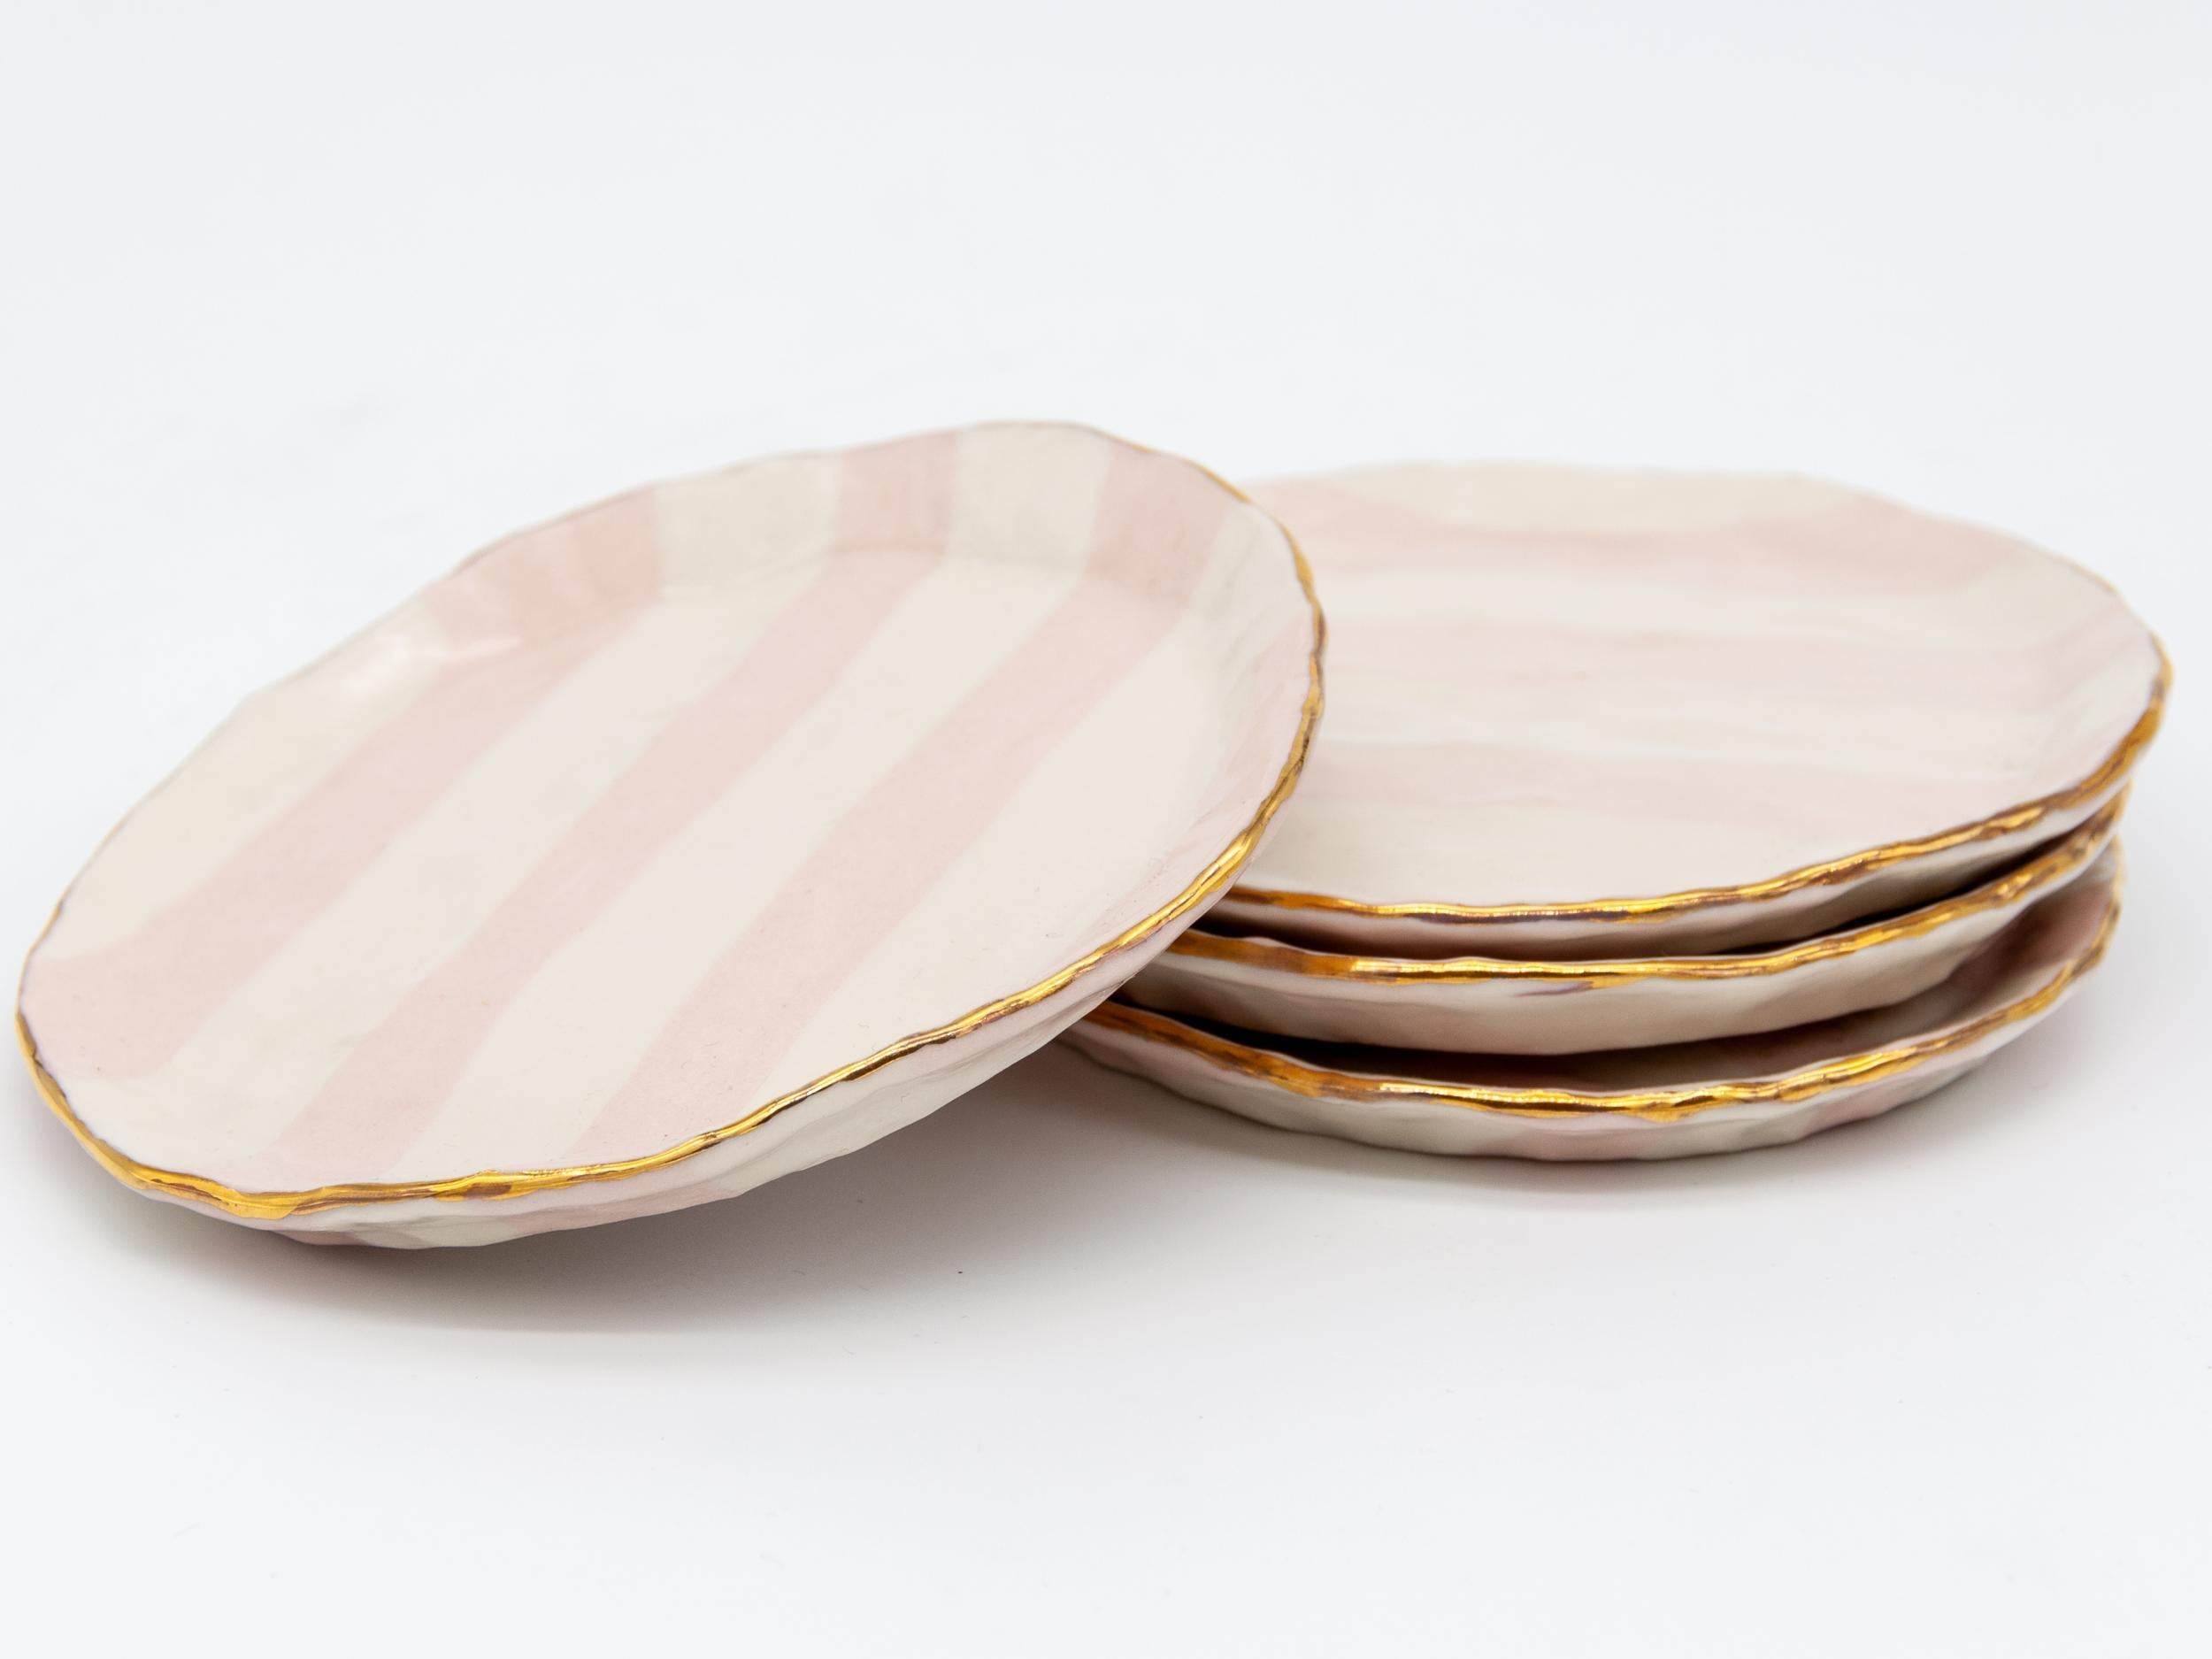 Isabel Halley is a 21st-century ceramic artist based in Brooklyn, NY. She handcrafts all her designs making this set of pink and ivory Ribbon Plates with gold trim.